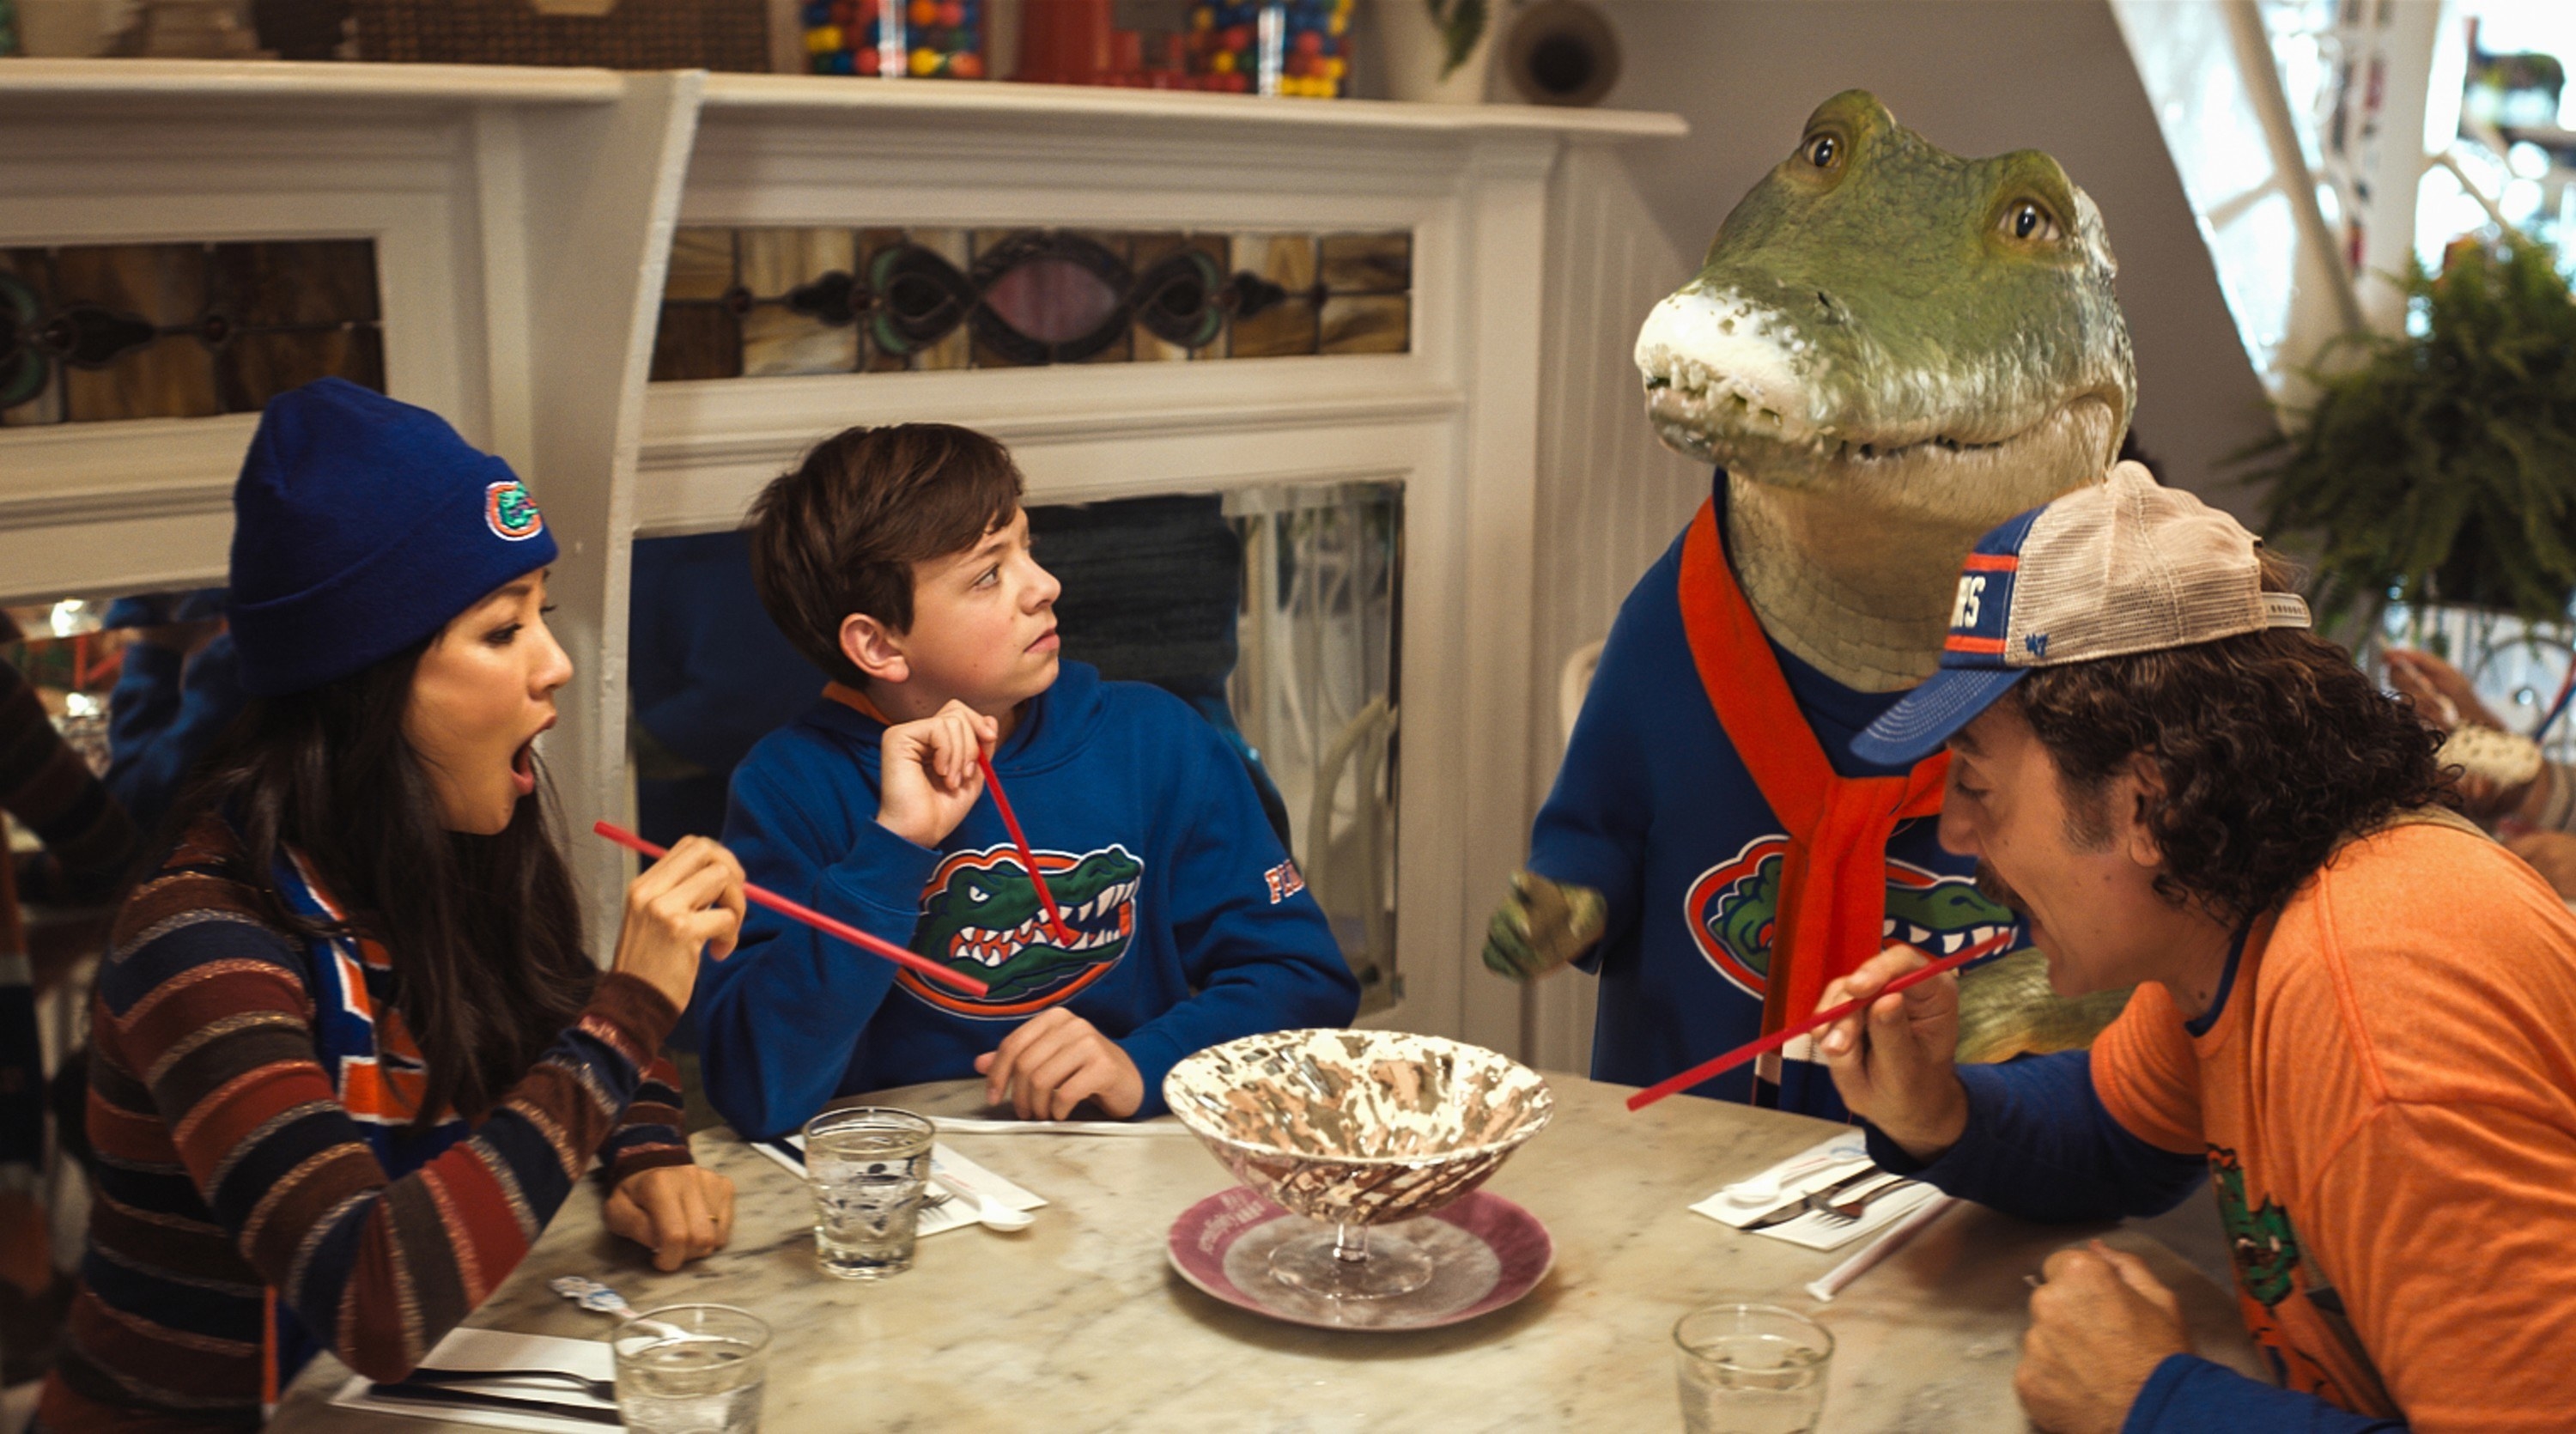 A family sitting at a dinner table with a talking crocodile